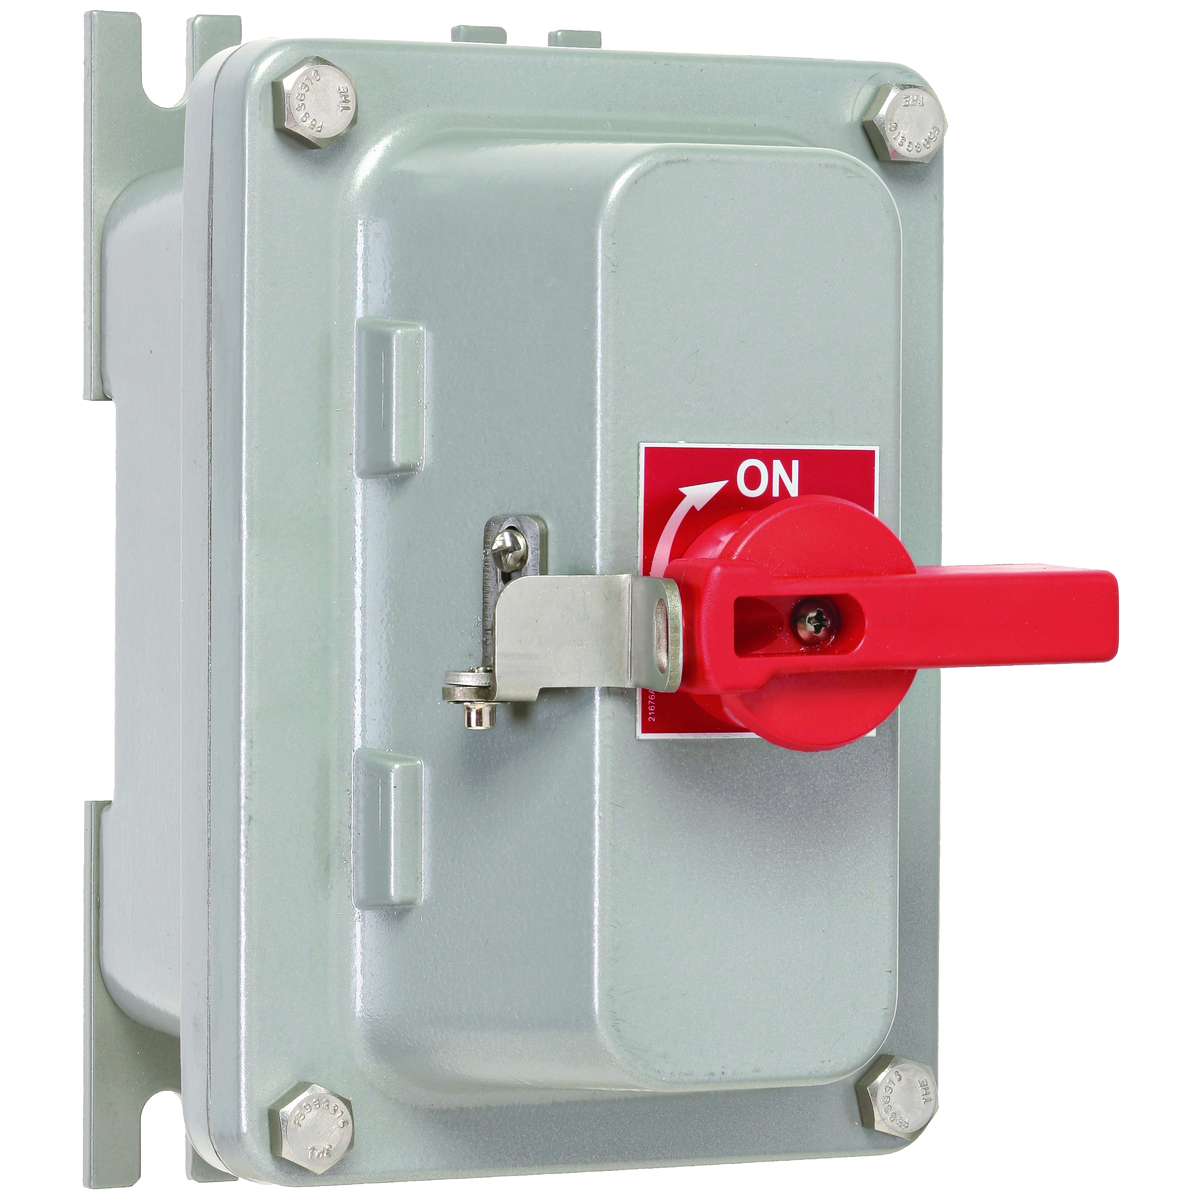 B7NFD SERIES - ALUMINUM FEED-THRU COMPACT NON-FUSED DISCONNECT SWITCHENCLOSURE - 30A